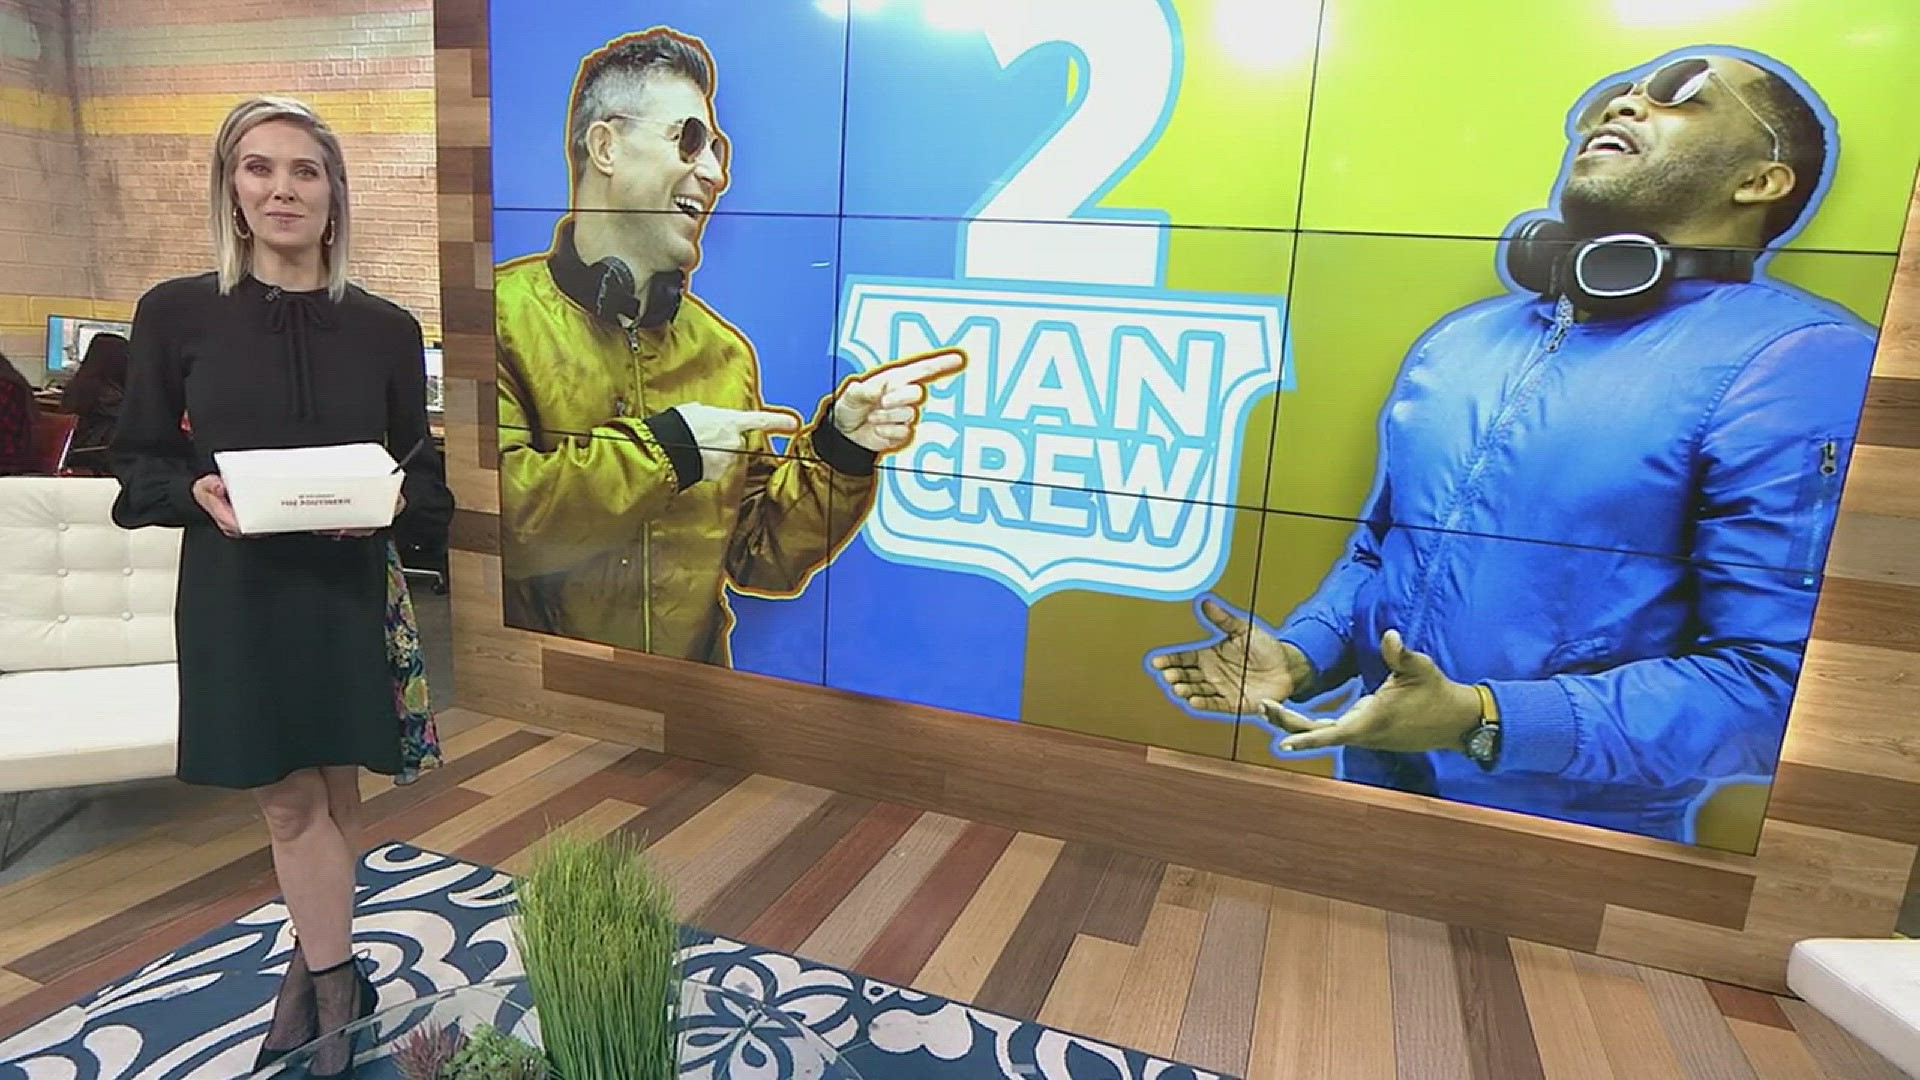 Daily Blast LIVE co-hosts Jeff Schroder and Al Jackson are going international! The Two Man Crew visit a pop-up poutine shop to learn about the iconic Canadian dish and share some gravy grub. Watch these buddies decide if the proof really is in the poutin